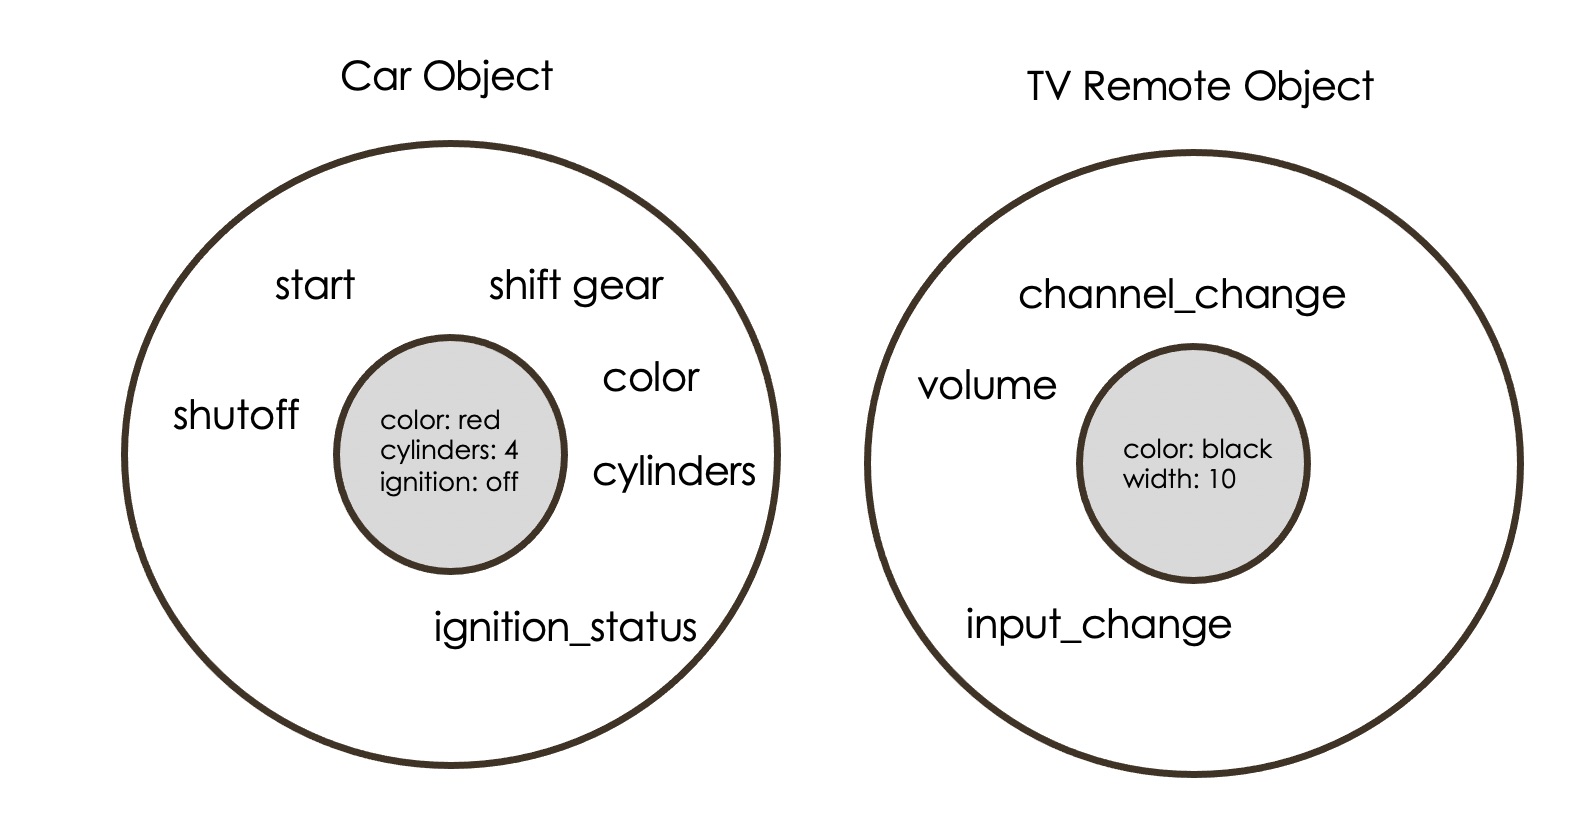 A car object and a TV remote object.